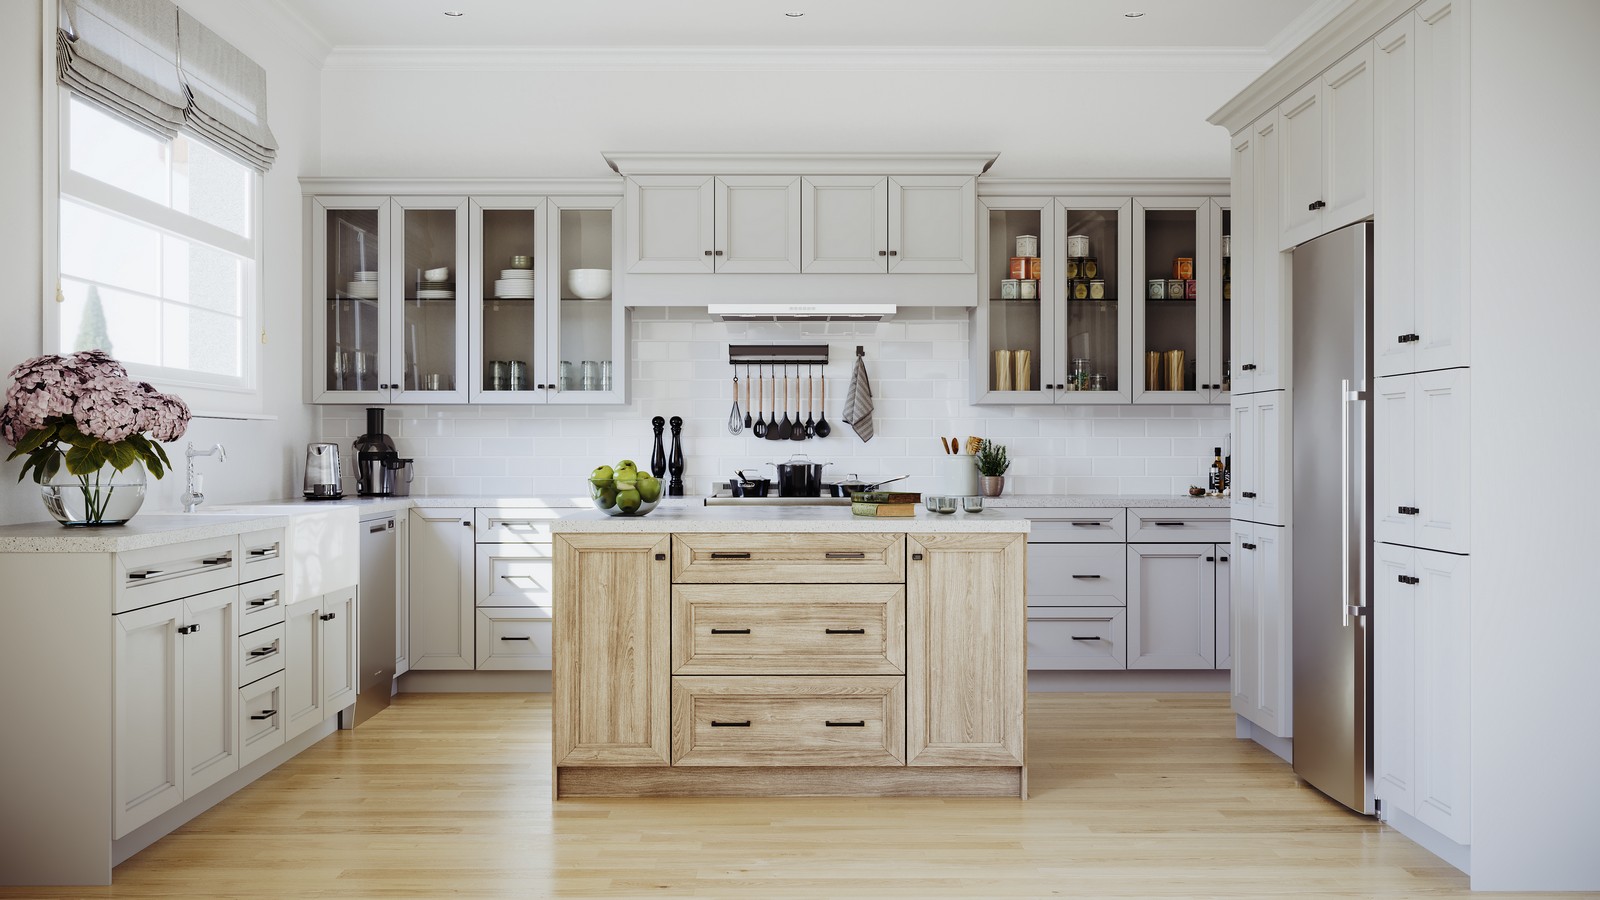 Kitchen beauty shots showcasing the cabinetry style - , 6